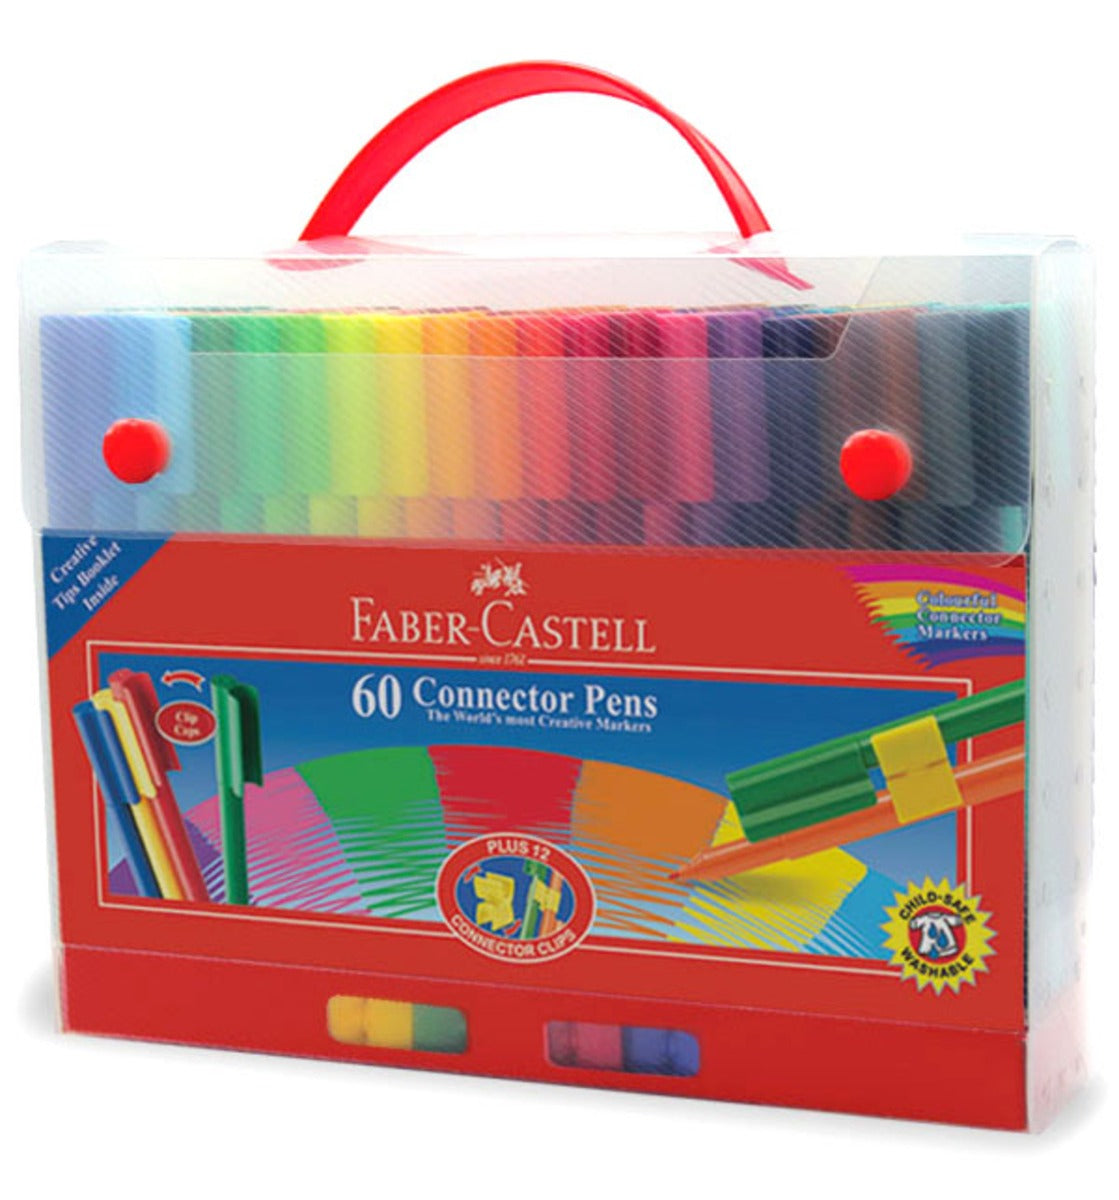 Faber-Castell Playing & Learning 60 Connector Pens in Case